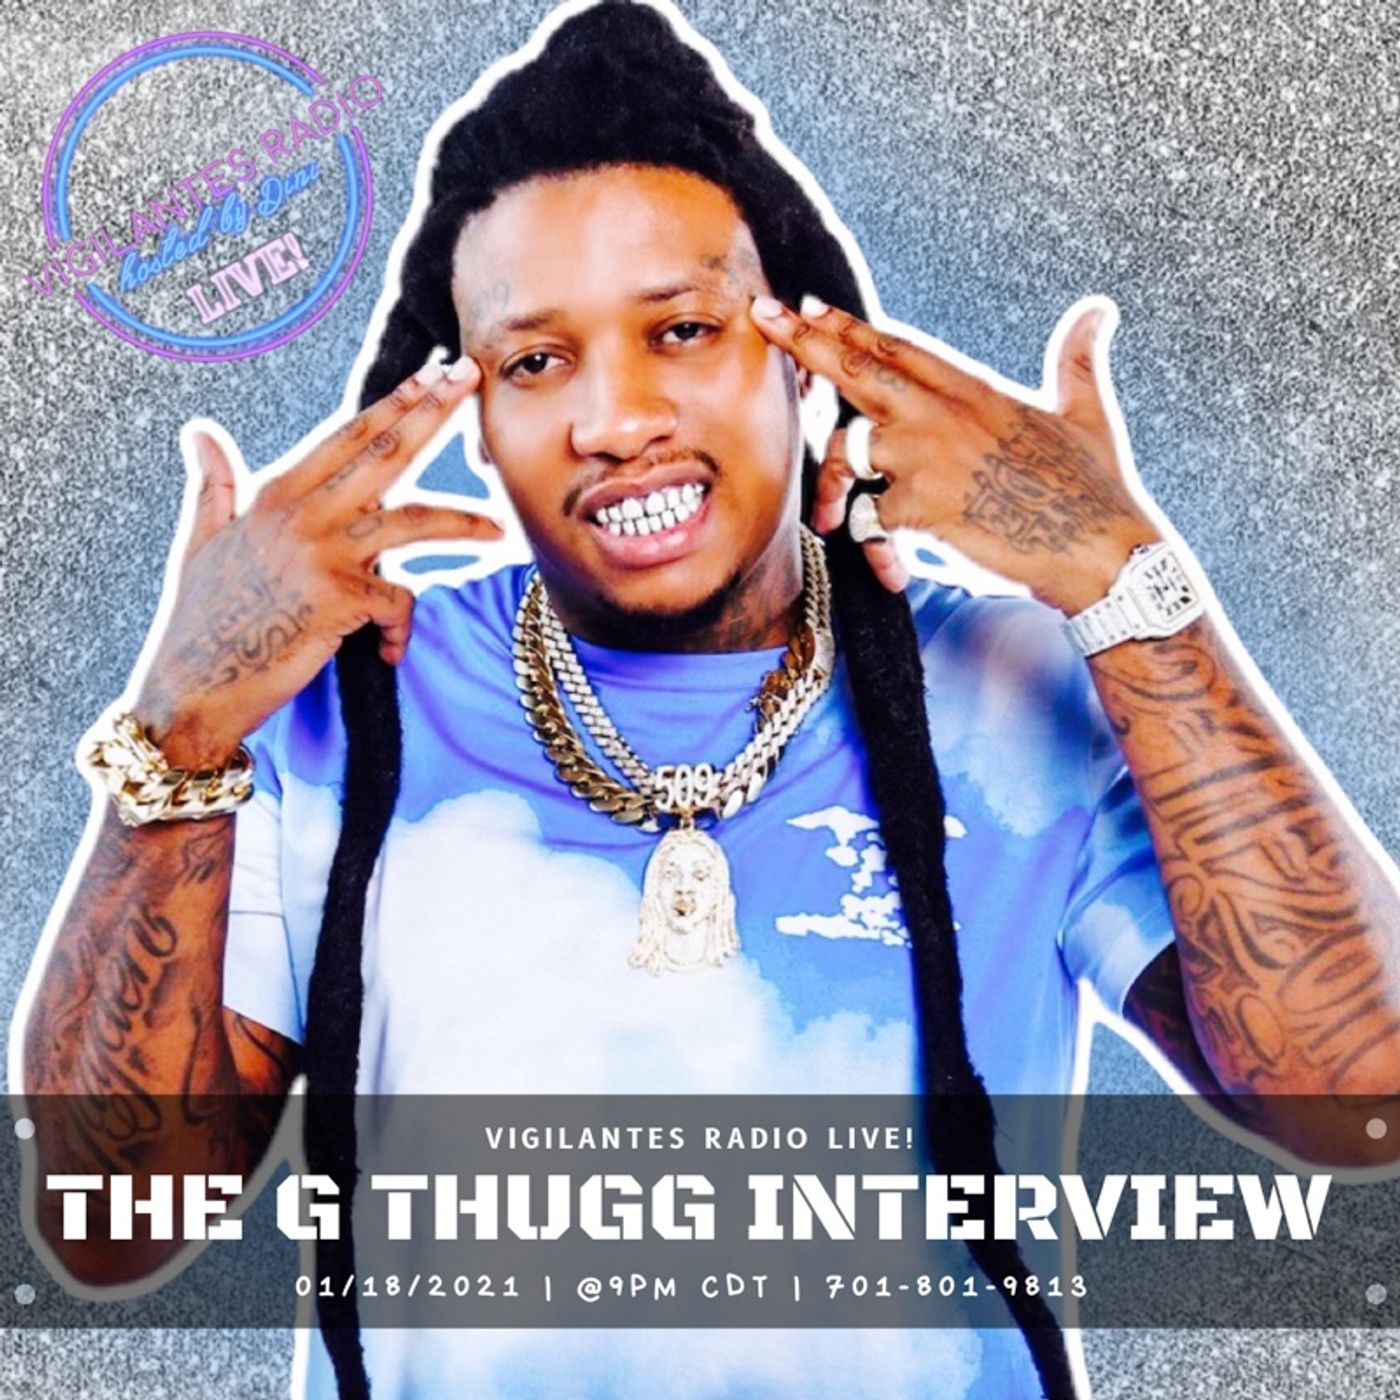 The G Thugg Interview. Image